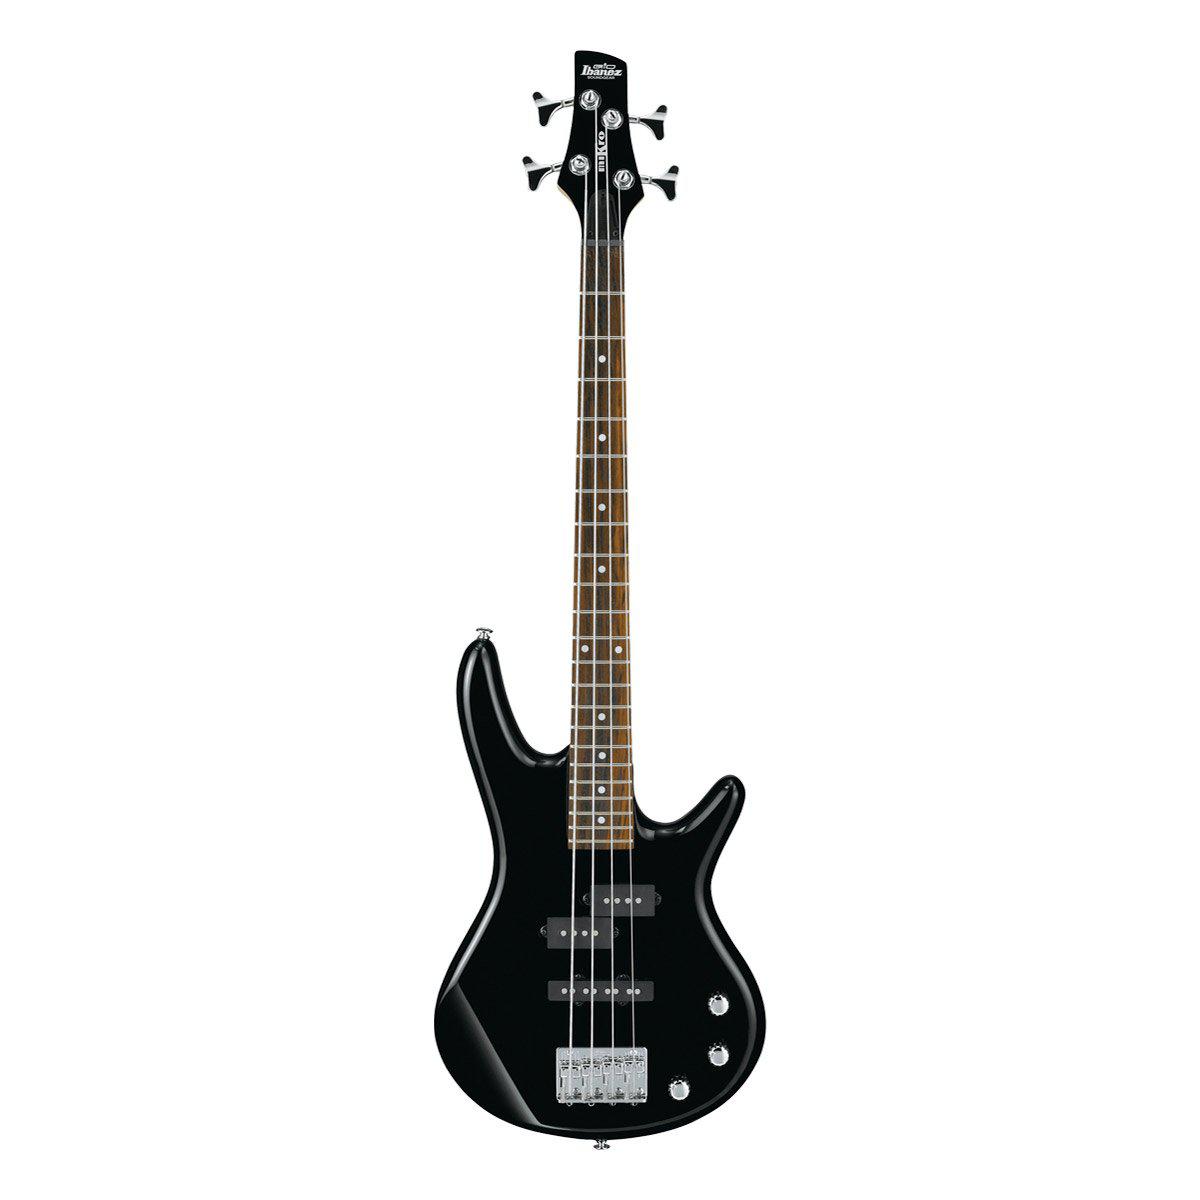 Ibanez GSRM20 Mikro Short Scale Bass Guitar-Black-Andy's Music